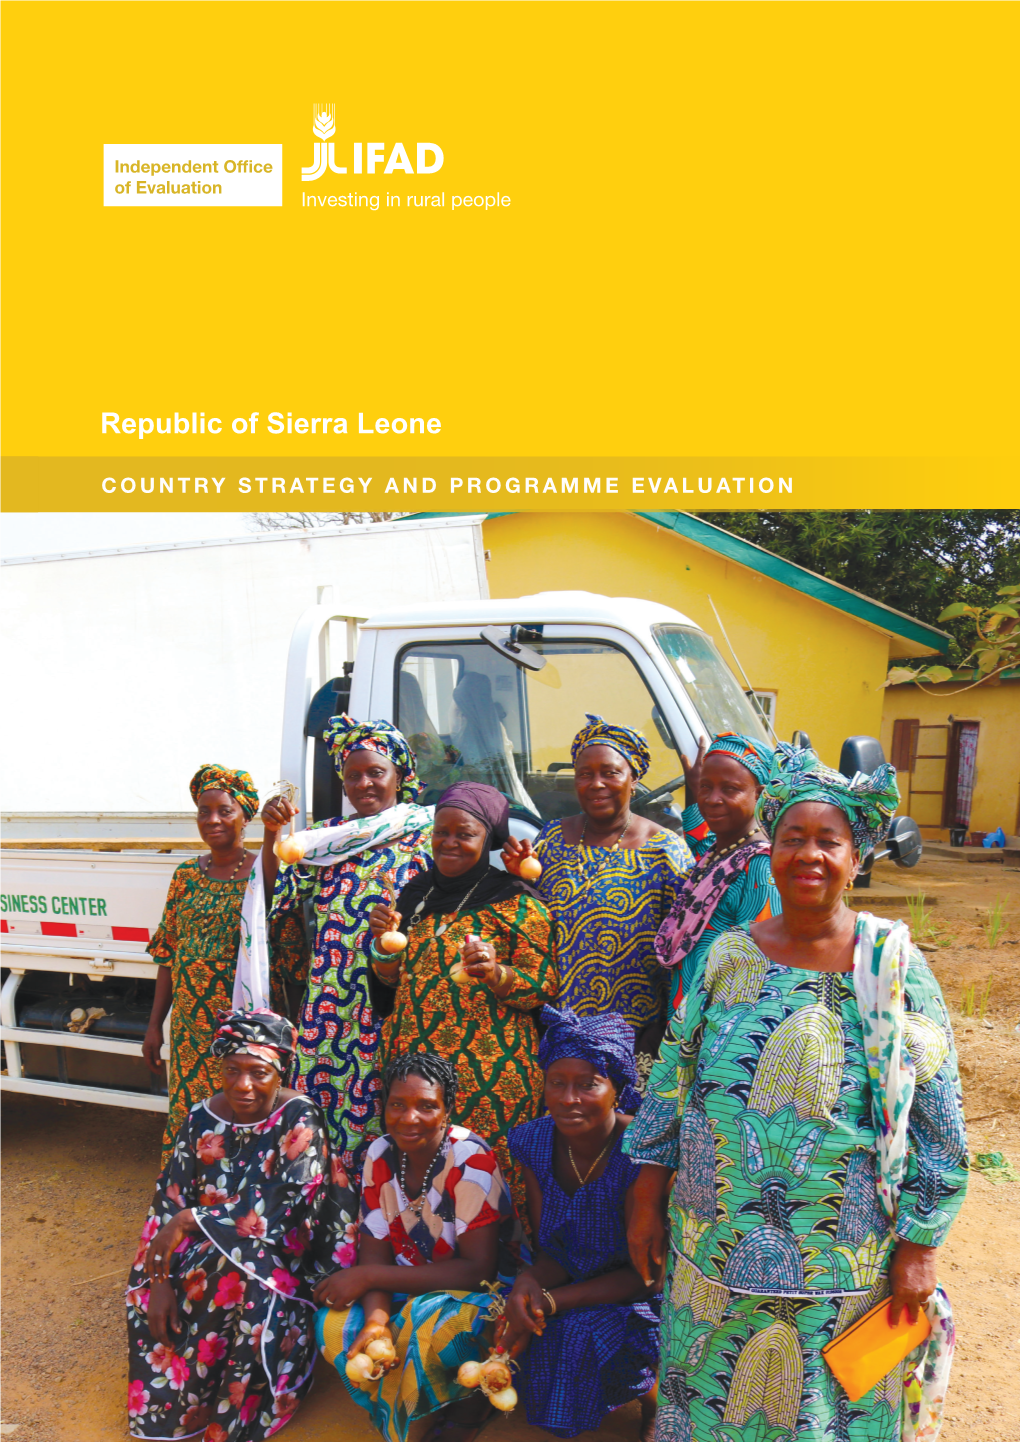 Republic of Sierra Leone COUNTRY STRATEGY and PROGRAMME EVALUATION